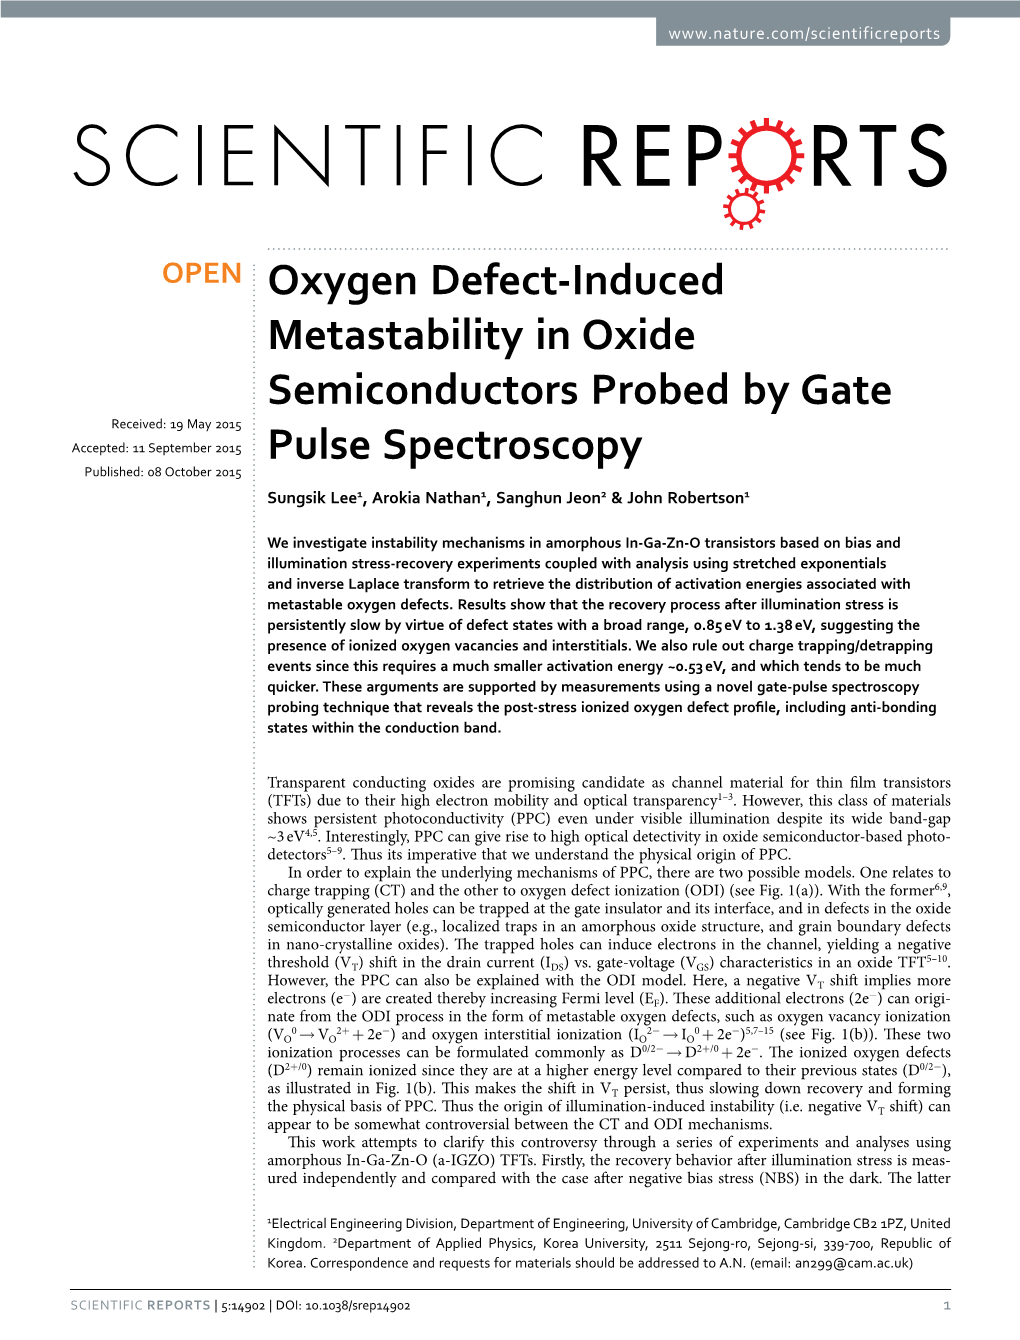 Oxygen Defect-Induced Metastability in Oxide Semiconductors Probed By